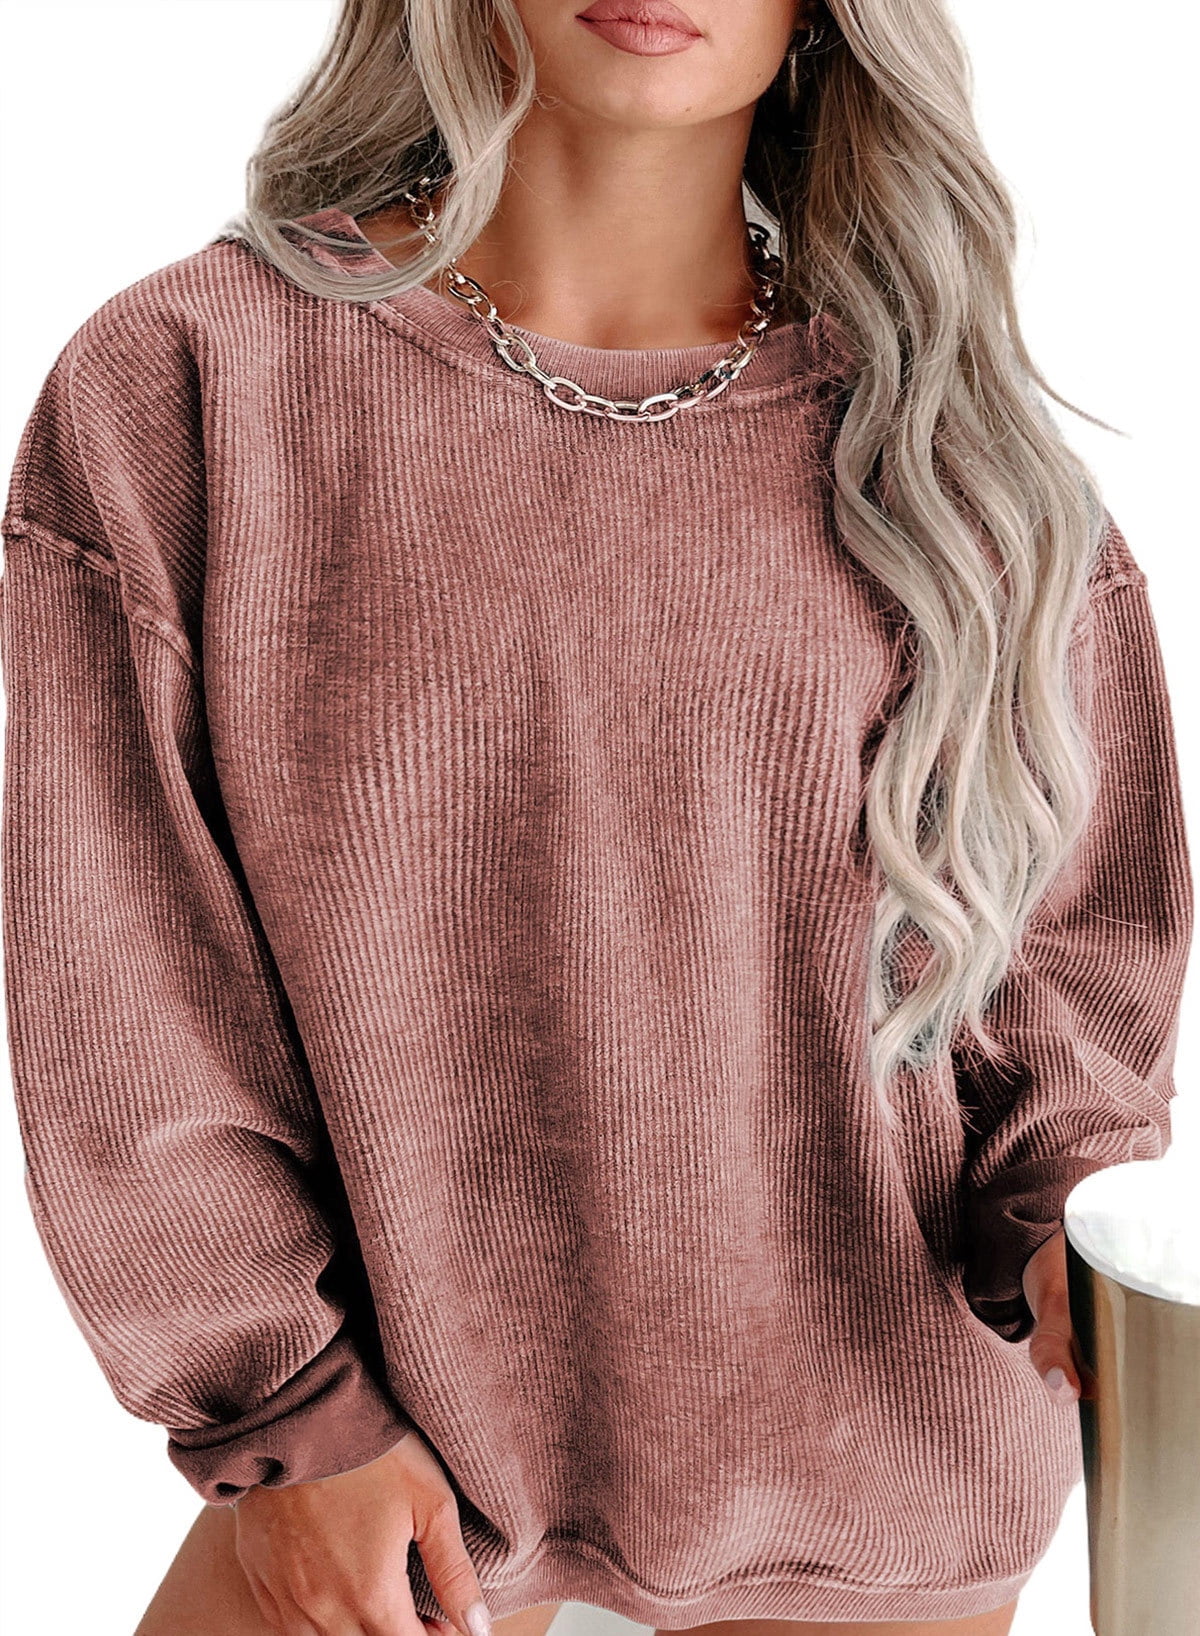 Ebifin Women's Oversized Long Sleeve Sweatshirts Pure Color Round Neck  Casual Pullover Shirt